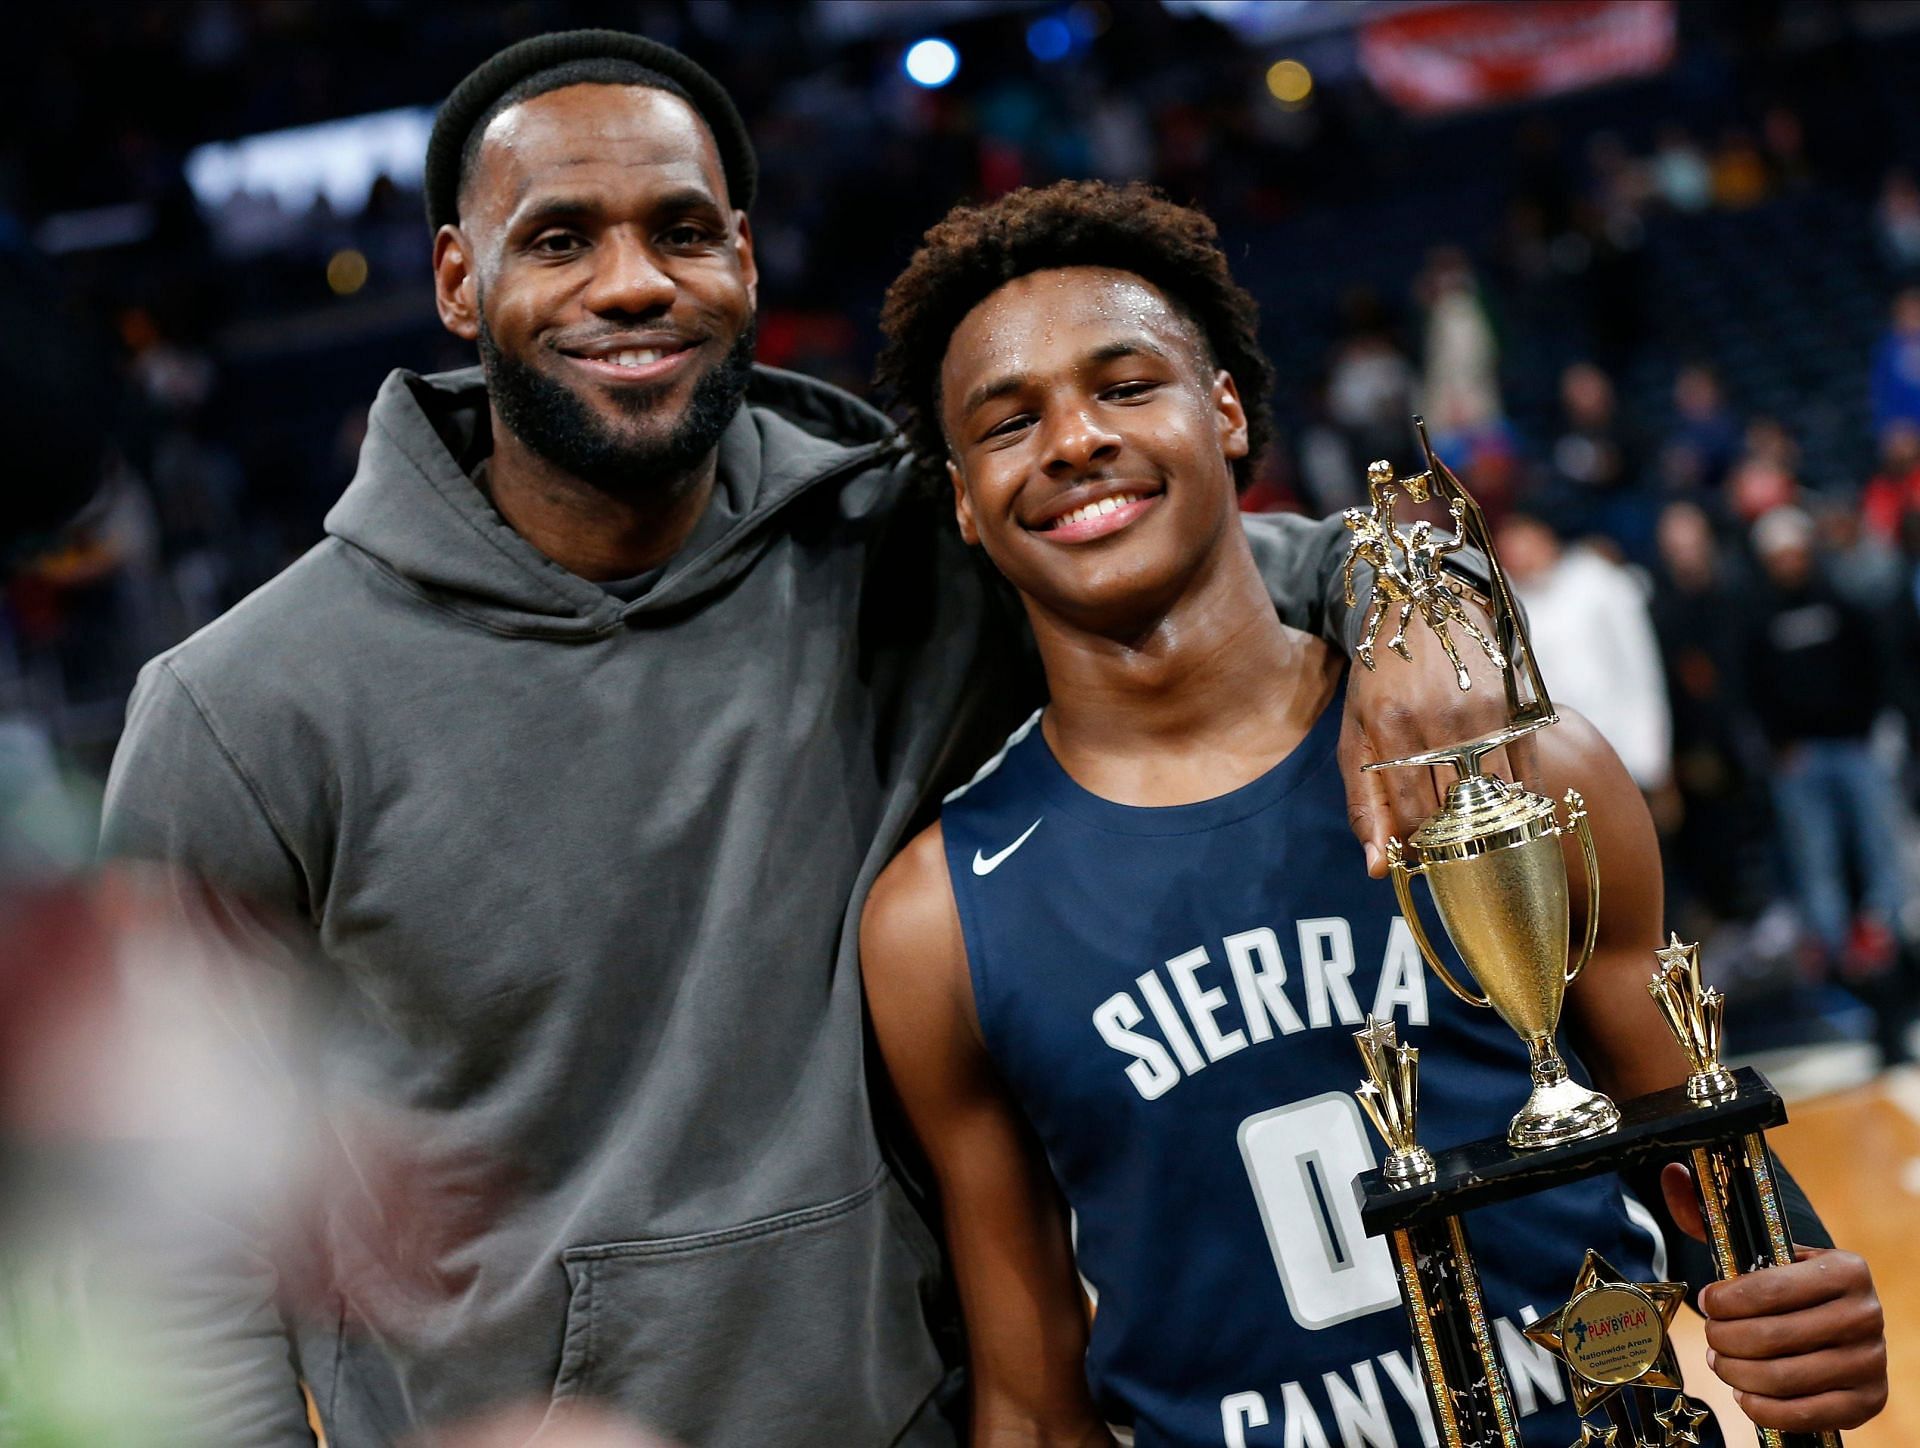 Los Angeles Lakers forward LeBron James and son Bronny James